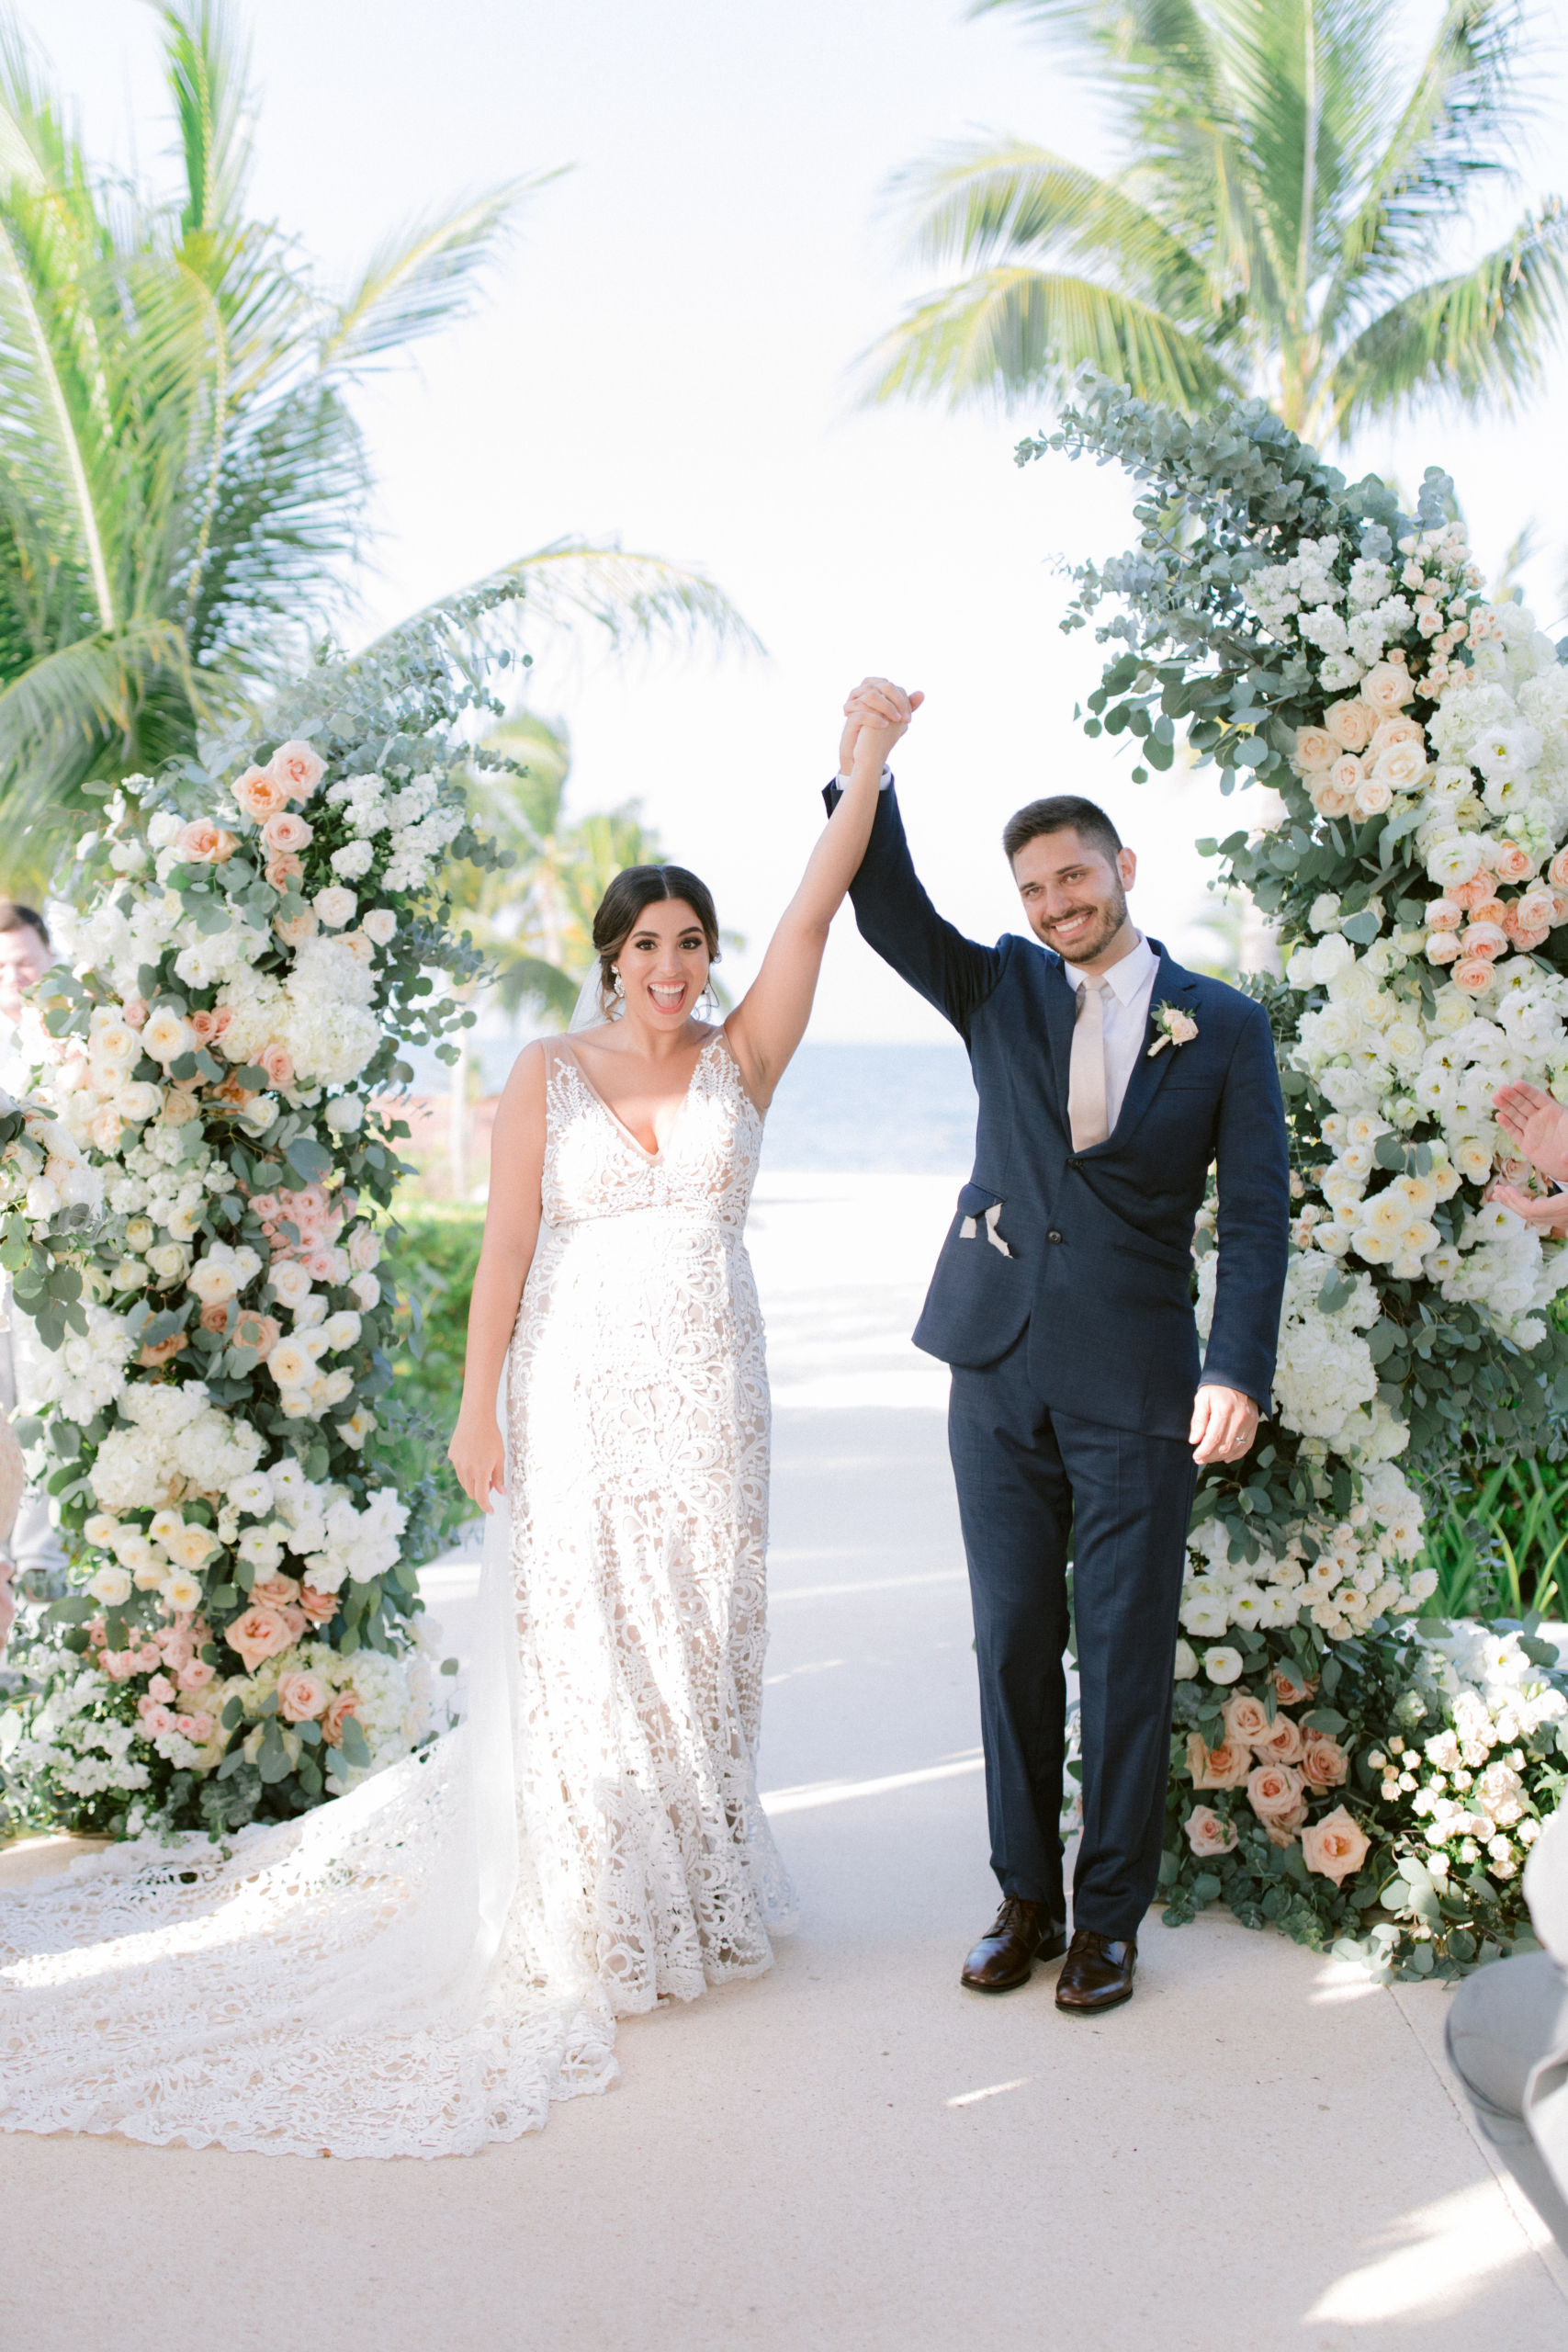 Newlyweds standing at a floral arch with palmtrees in the background, hold hands and raise them in the air to celebrate that they are just married.